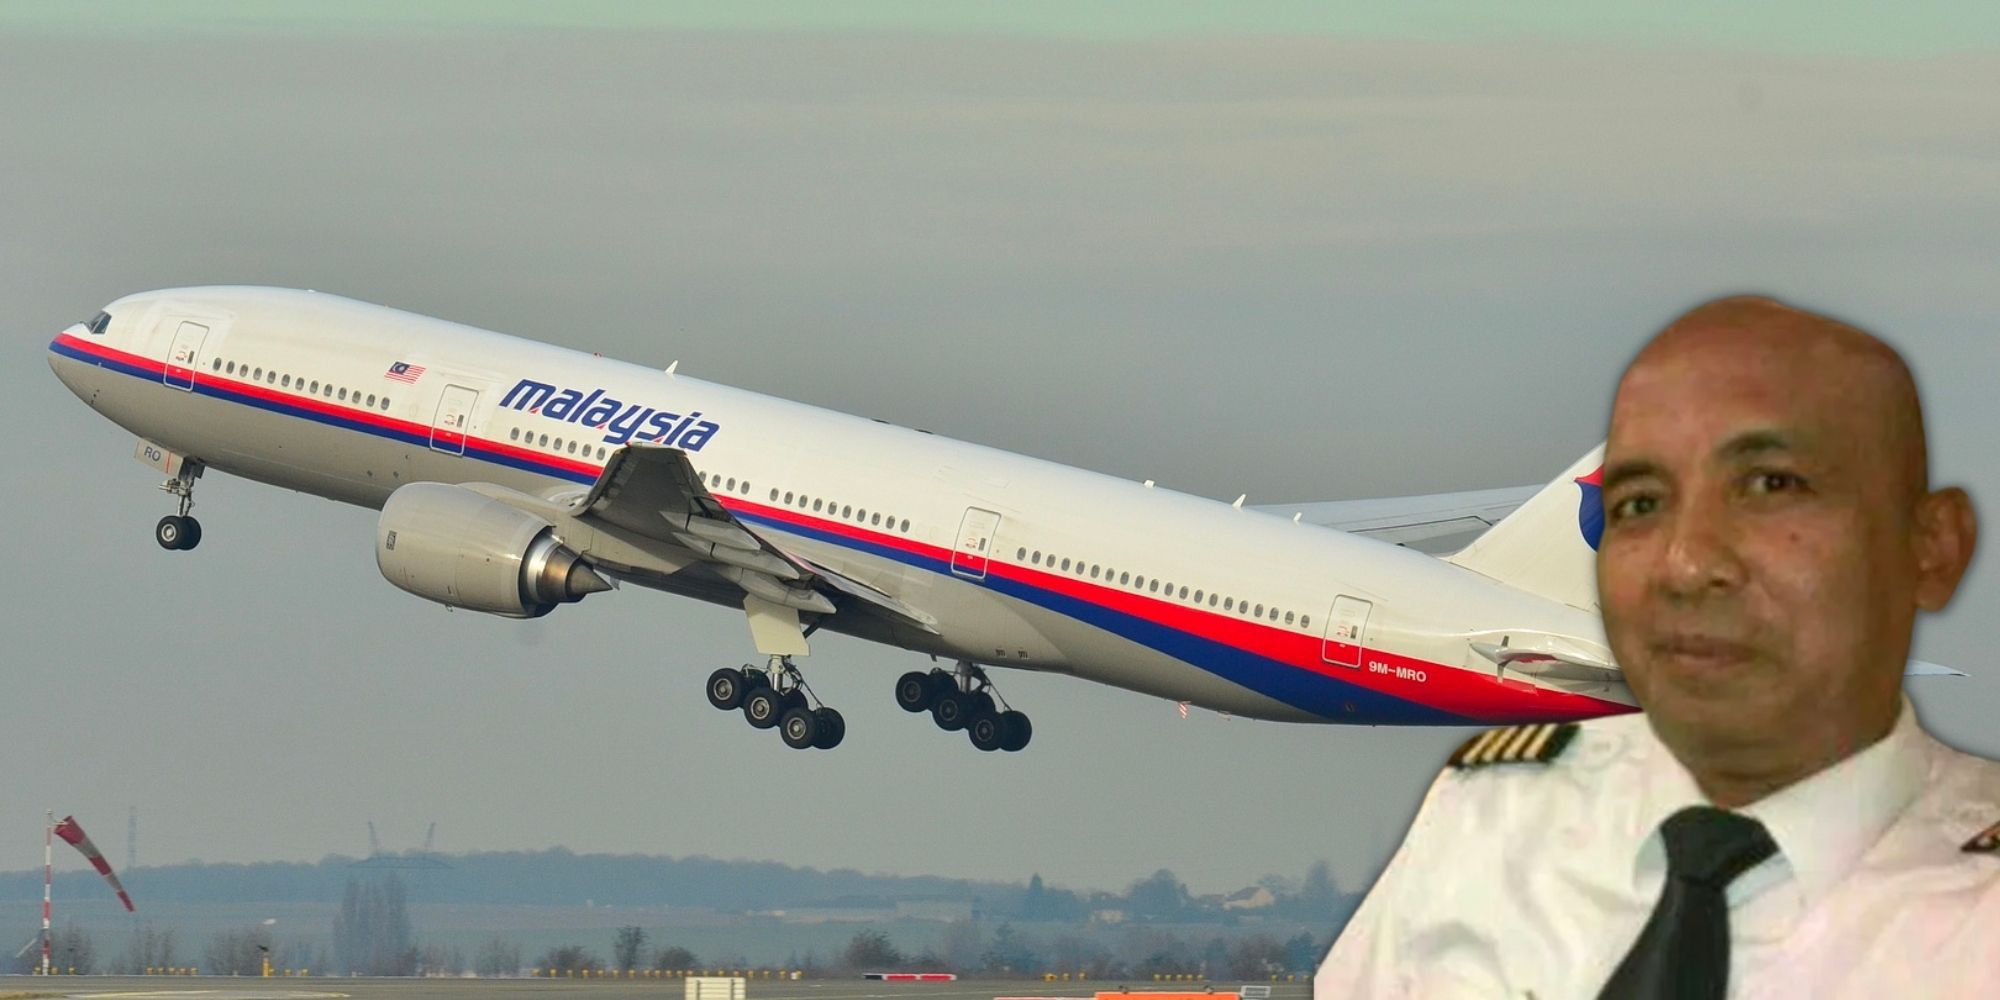 MH370 flight disappearance unsolved true crime